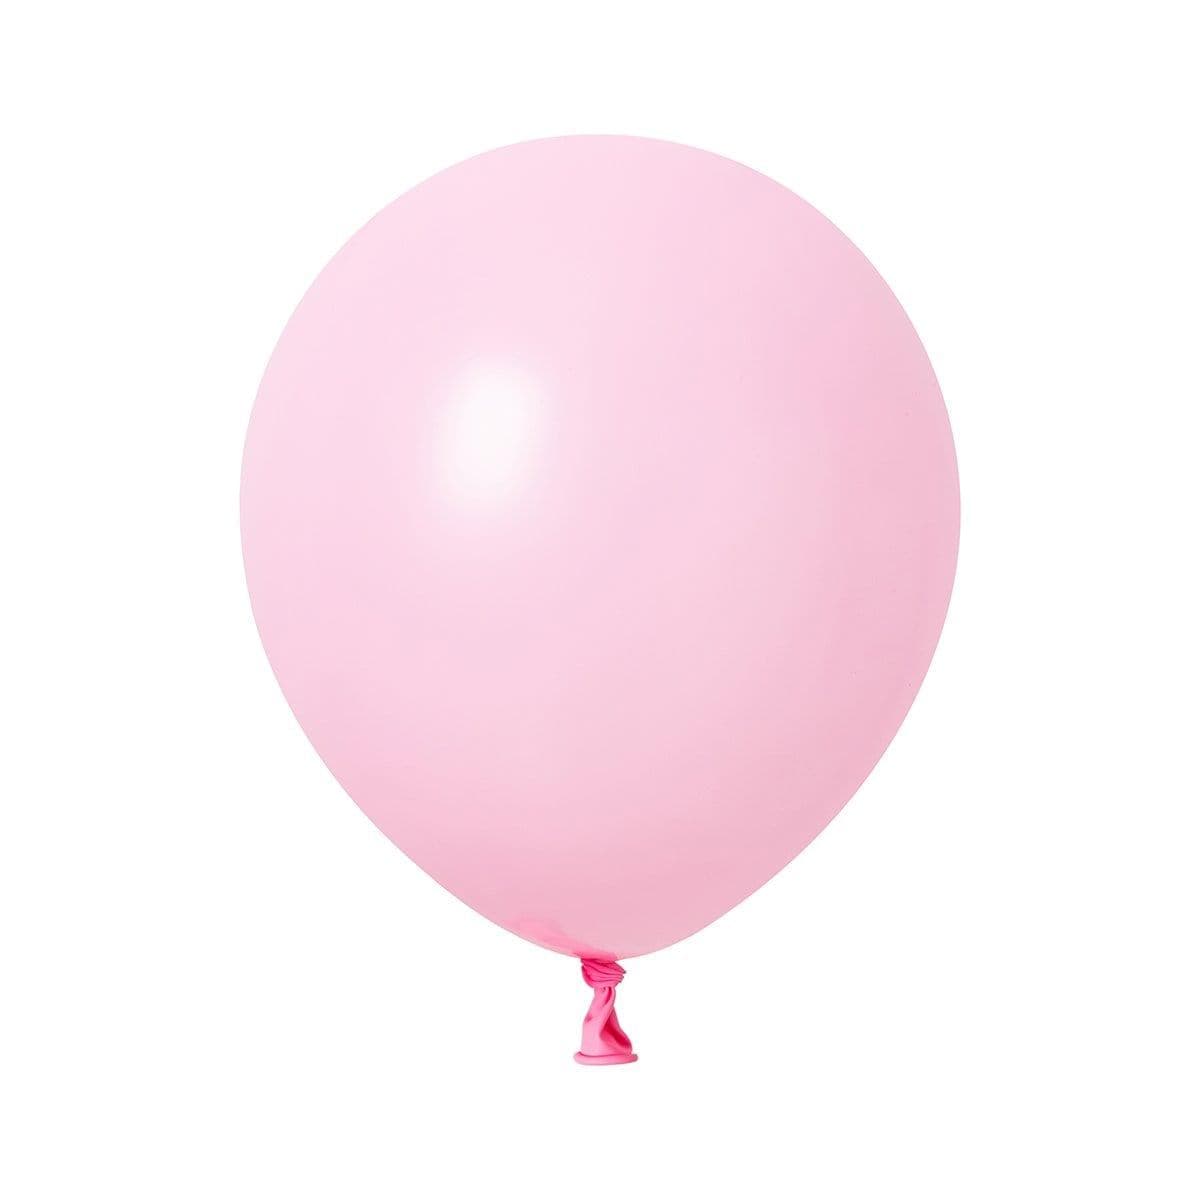 Buy Balloons Light Pink Latex Balloon 5 Inches, 100 Count sold at Party Expert